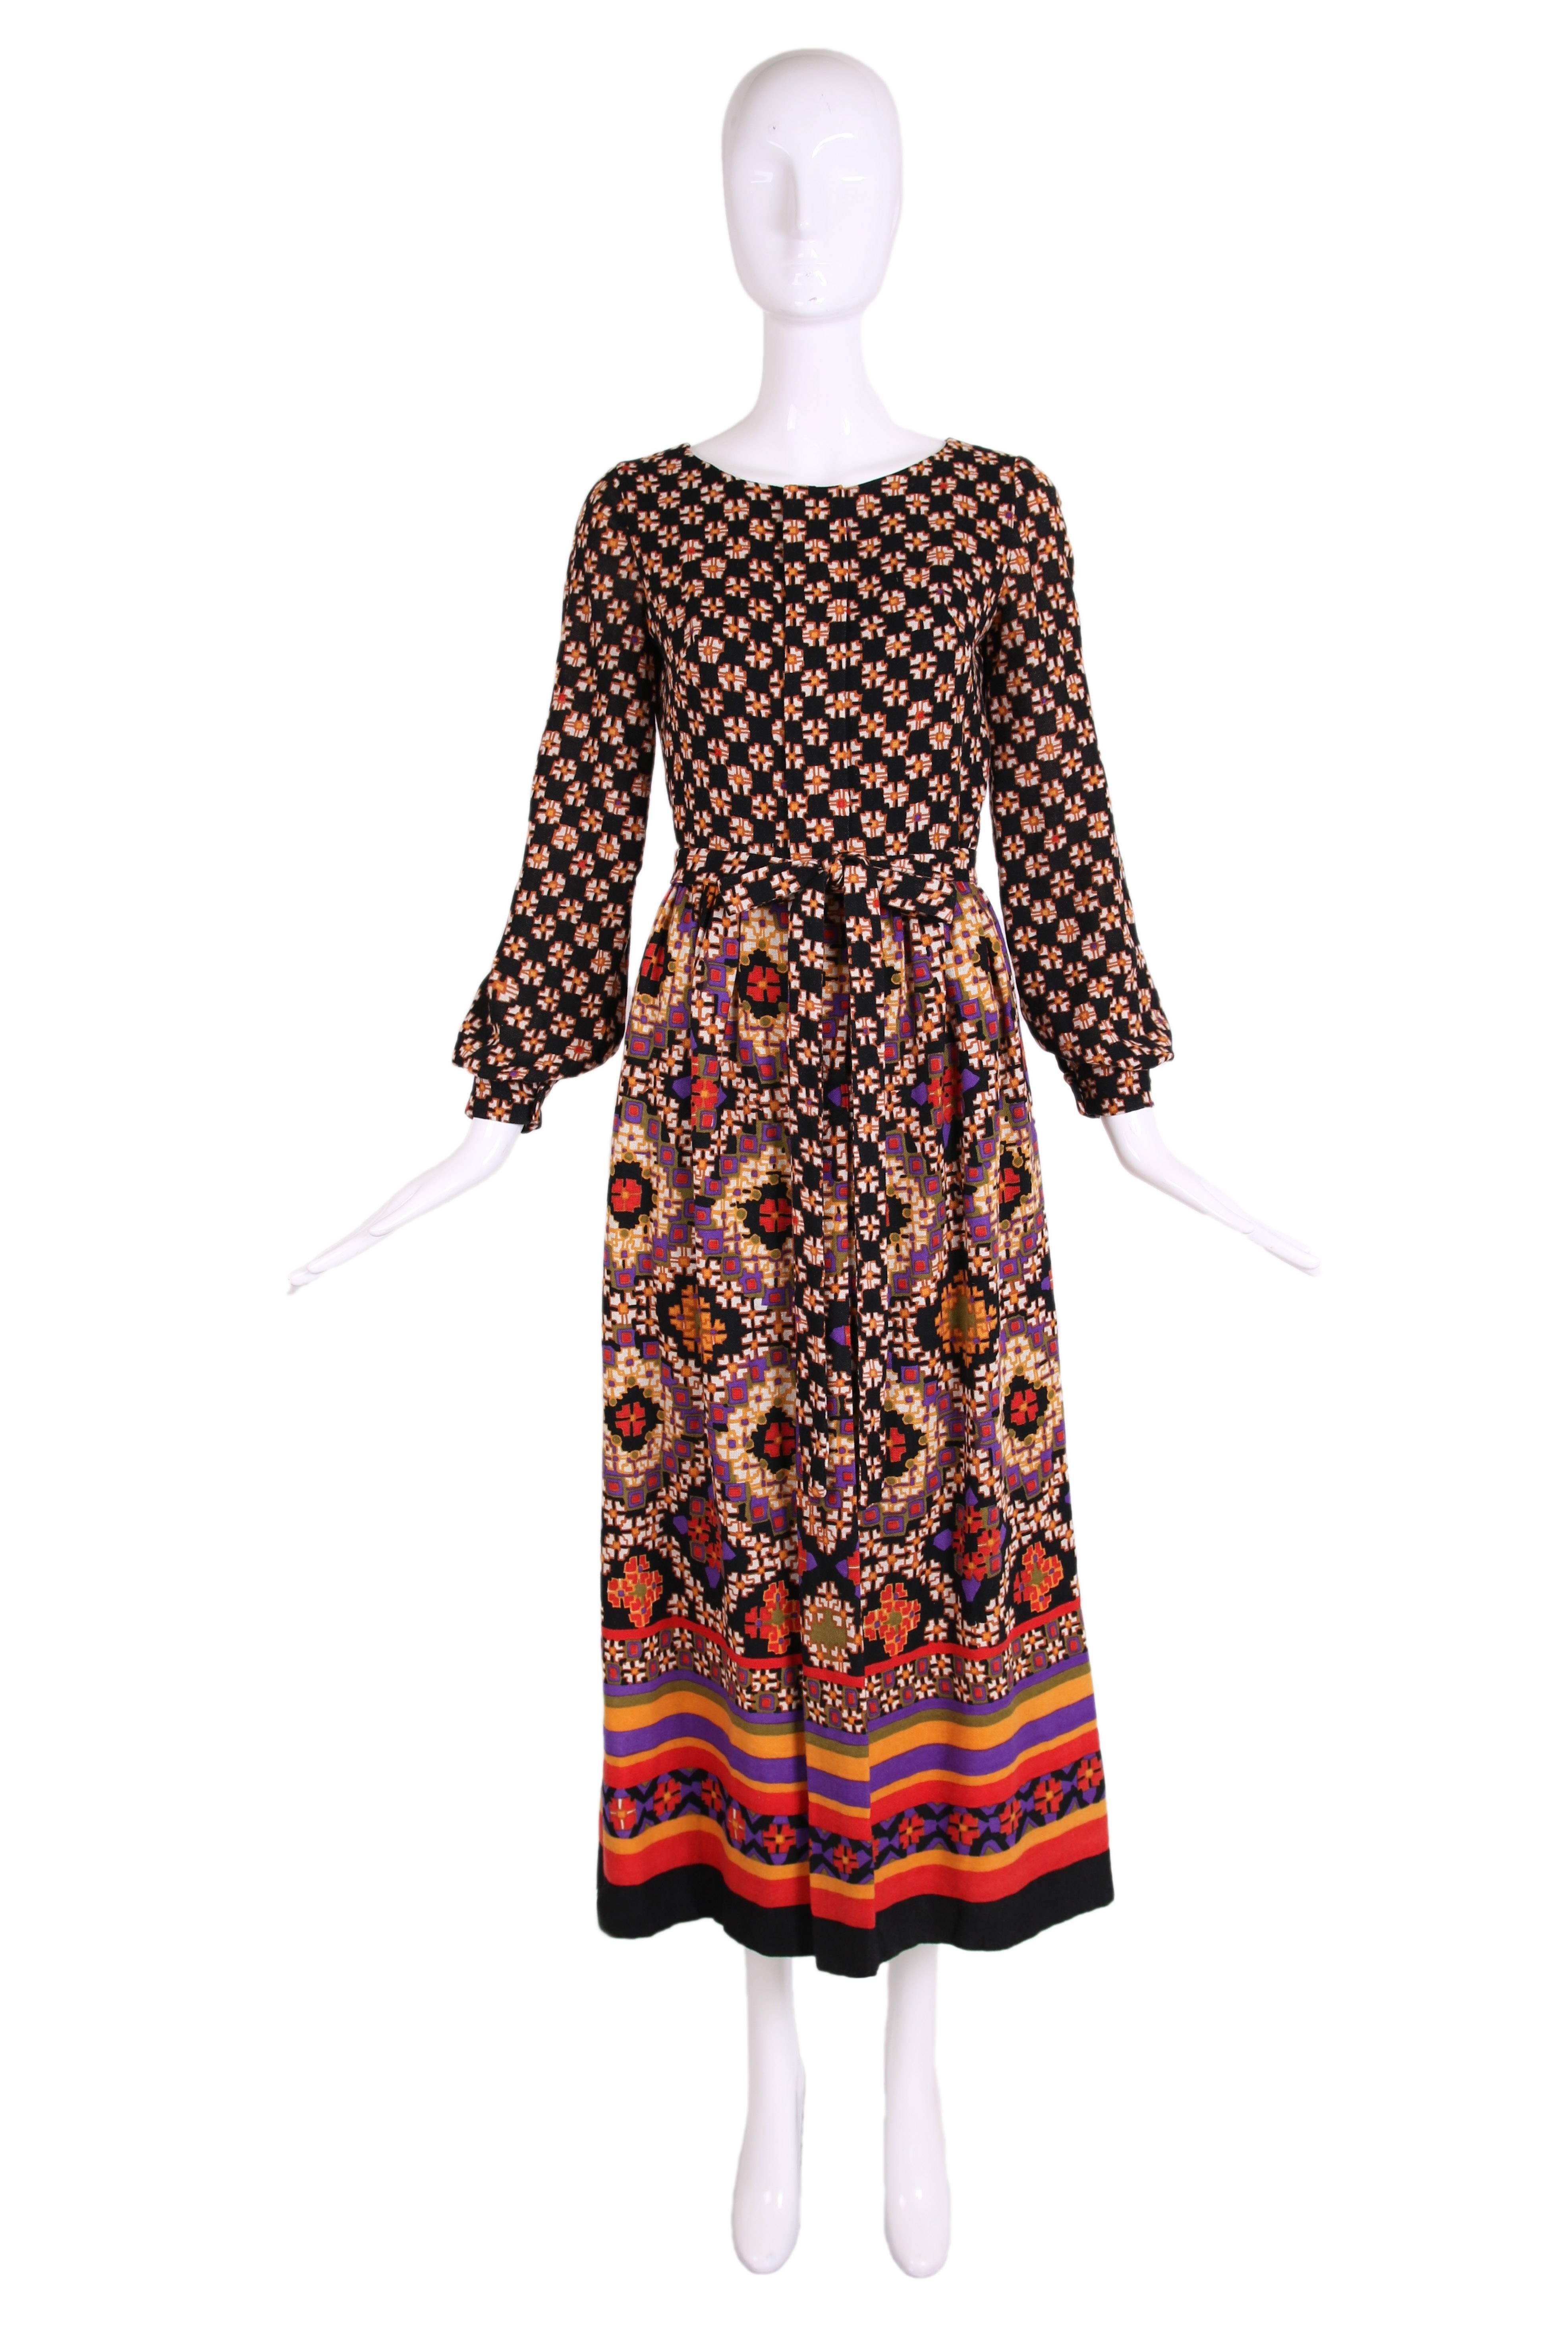 1970's Lanvin maxi dress with a geometric print in a light muslin wool. Hidden zipper closure up front and comes with a self belt. In excellent condition. No size tag, please consult measurements.
MEASUREMENTS:
Shoulders - 14.5